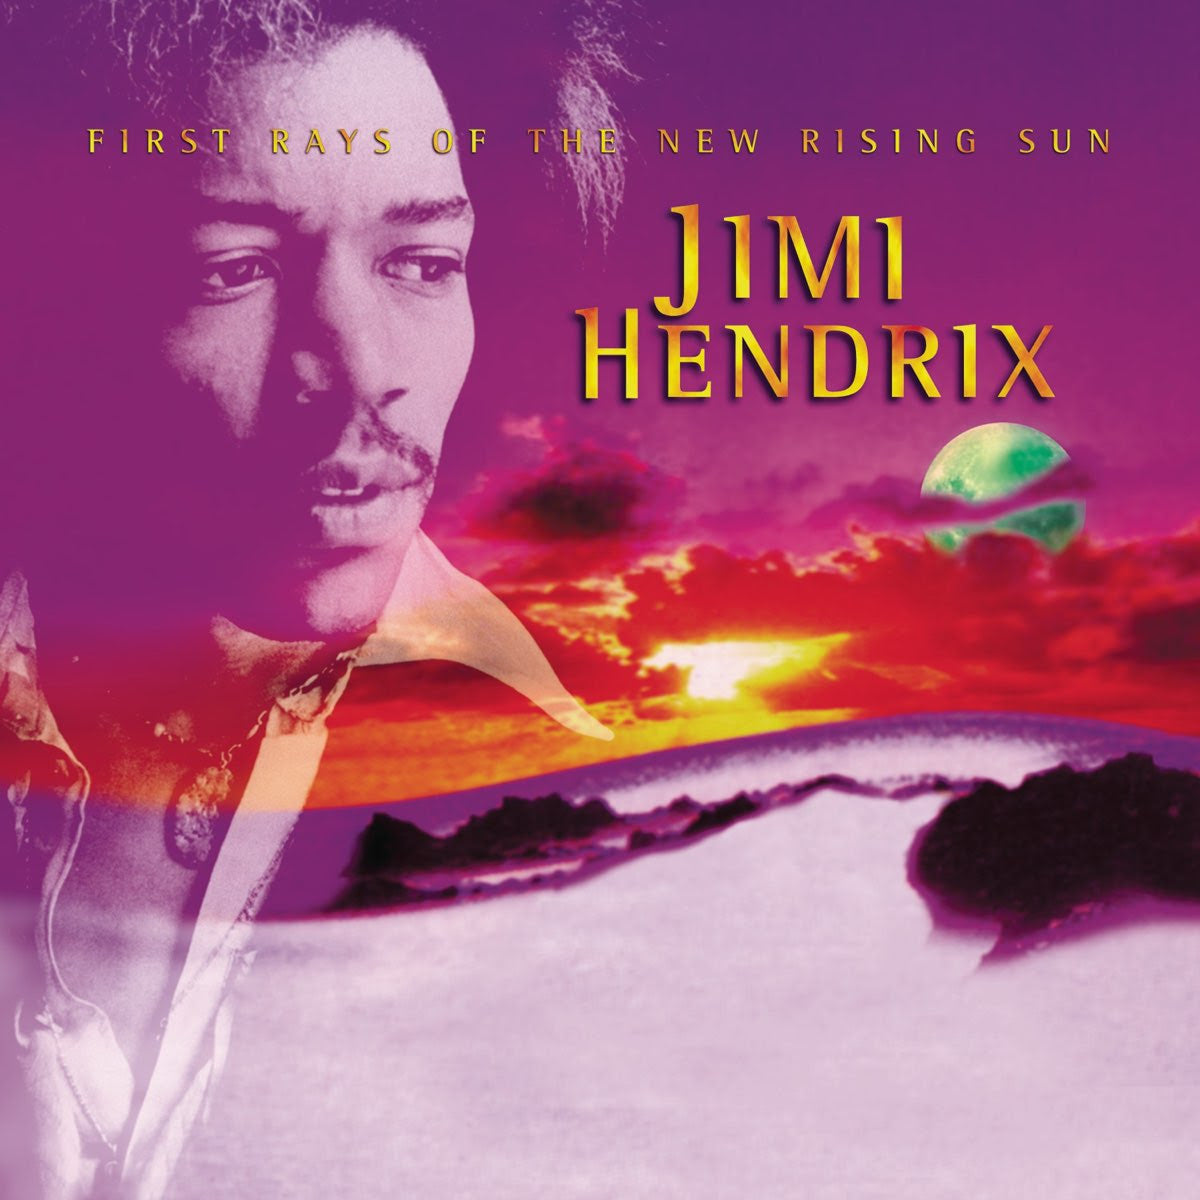 Jimi Hendrix - First Rays of the New Rising Sun | Buy the Vinyl LP from Flying Nun Records